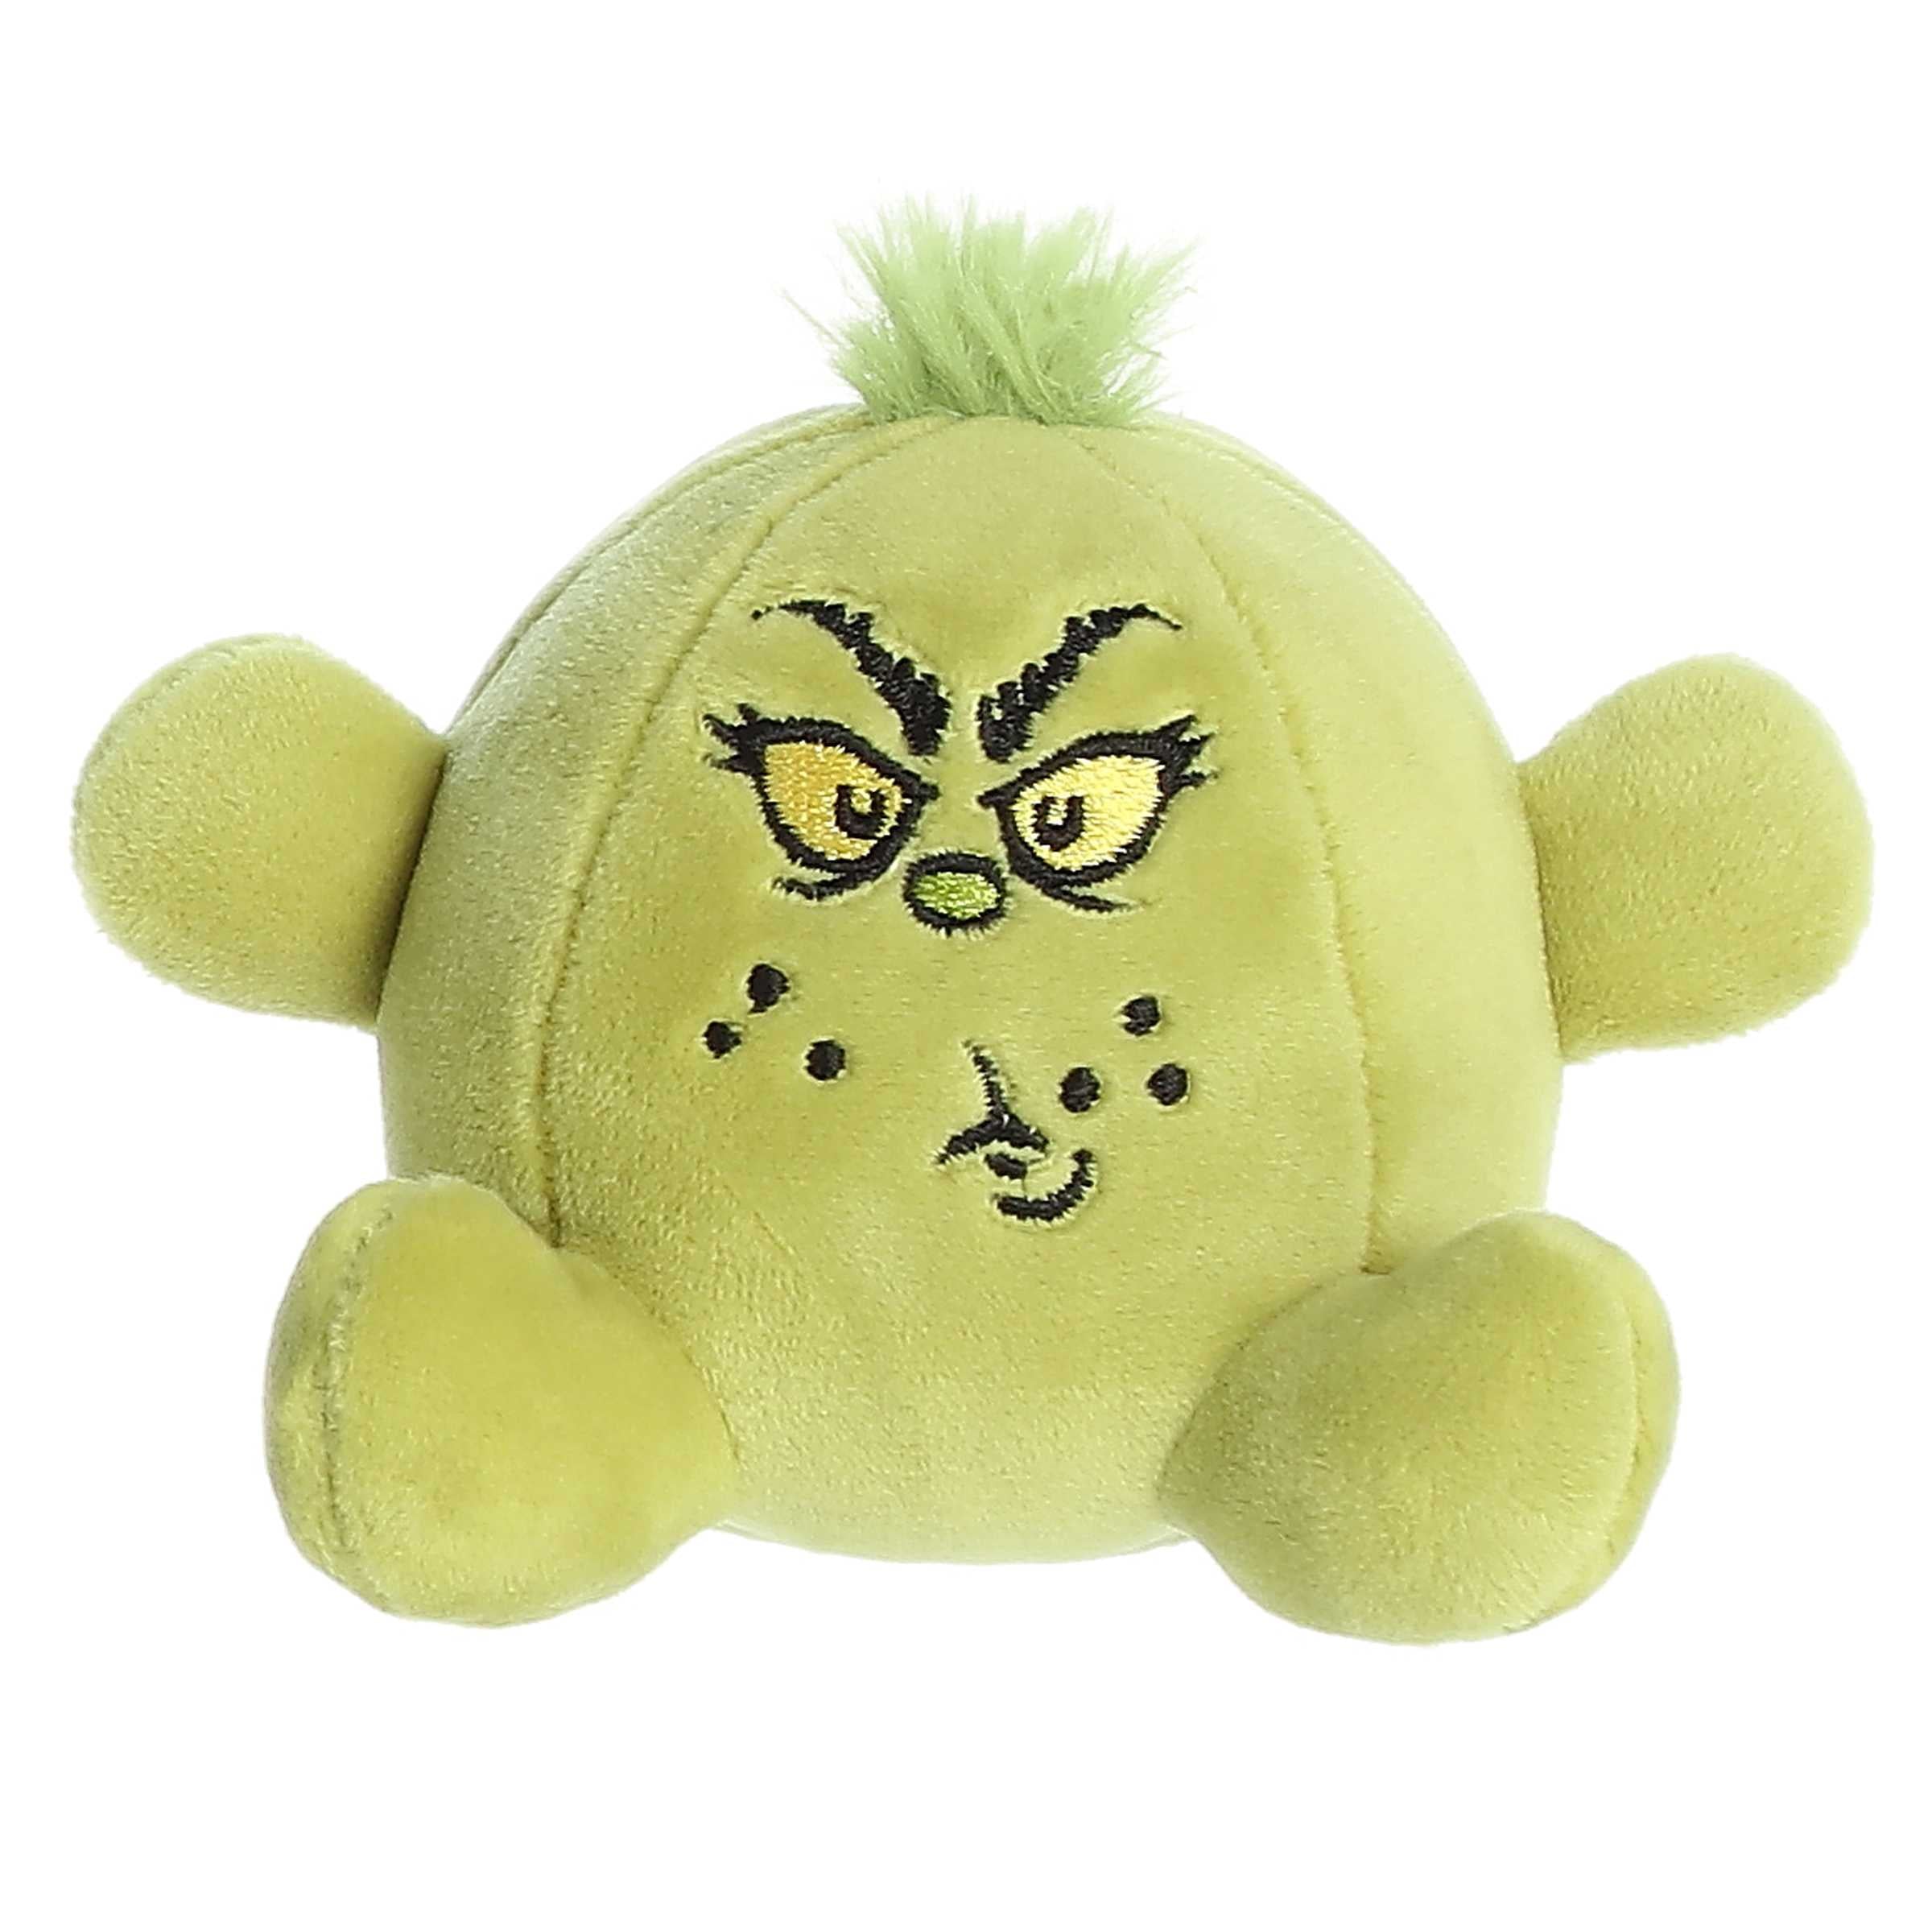 Dr. Seuss themed stress ball Grinch plush with grumpy face and "Stink Stank Stunk" embroidered on the back